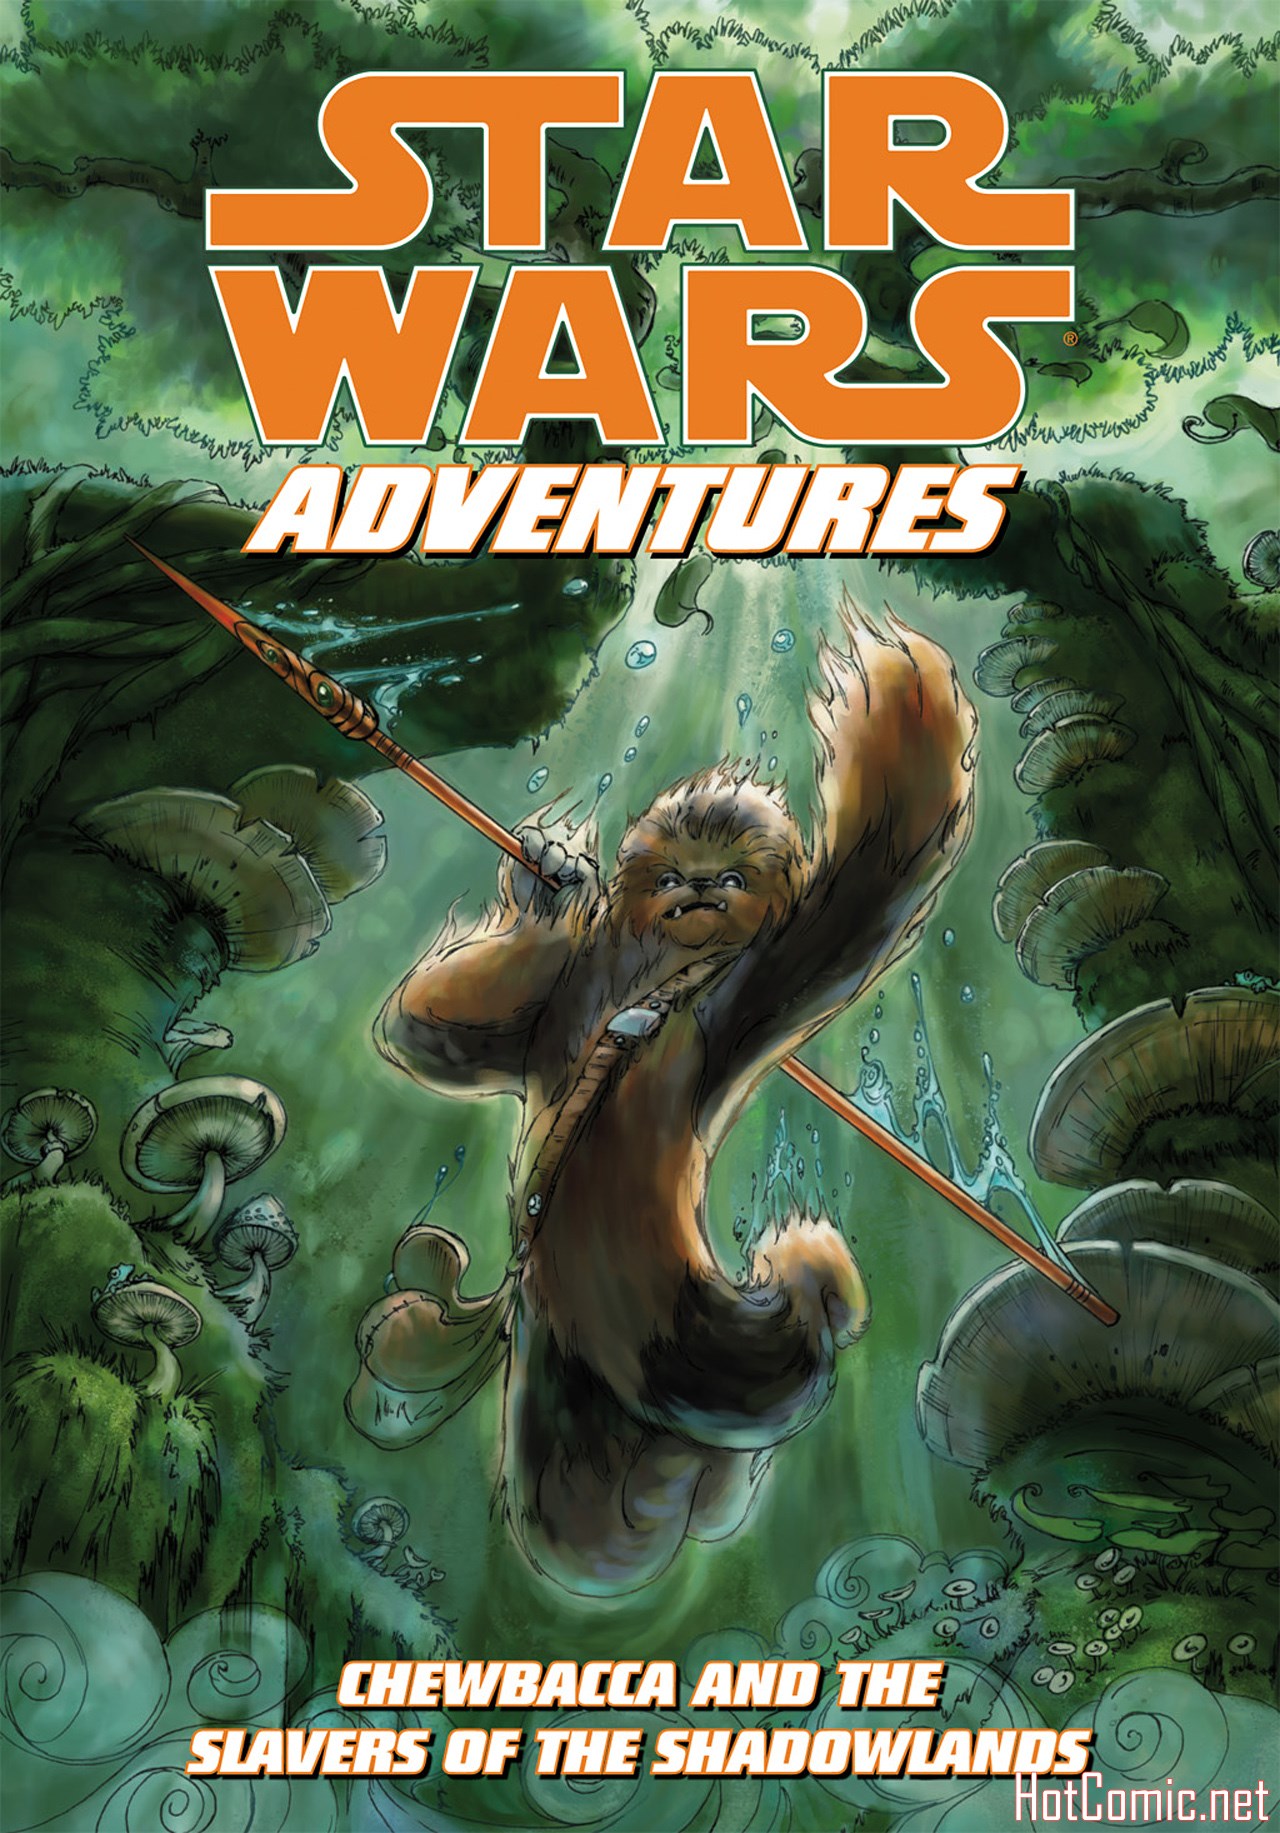 Star Wars Adventures - Chewbacca and the Slavers of the Shadowlands